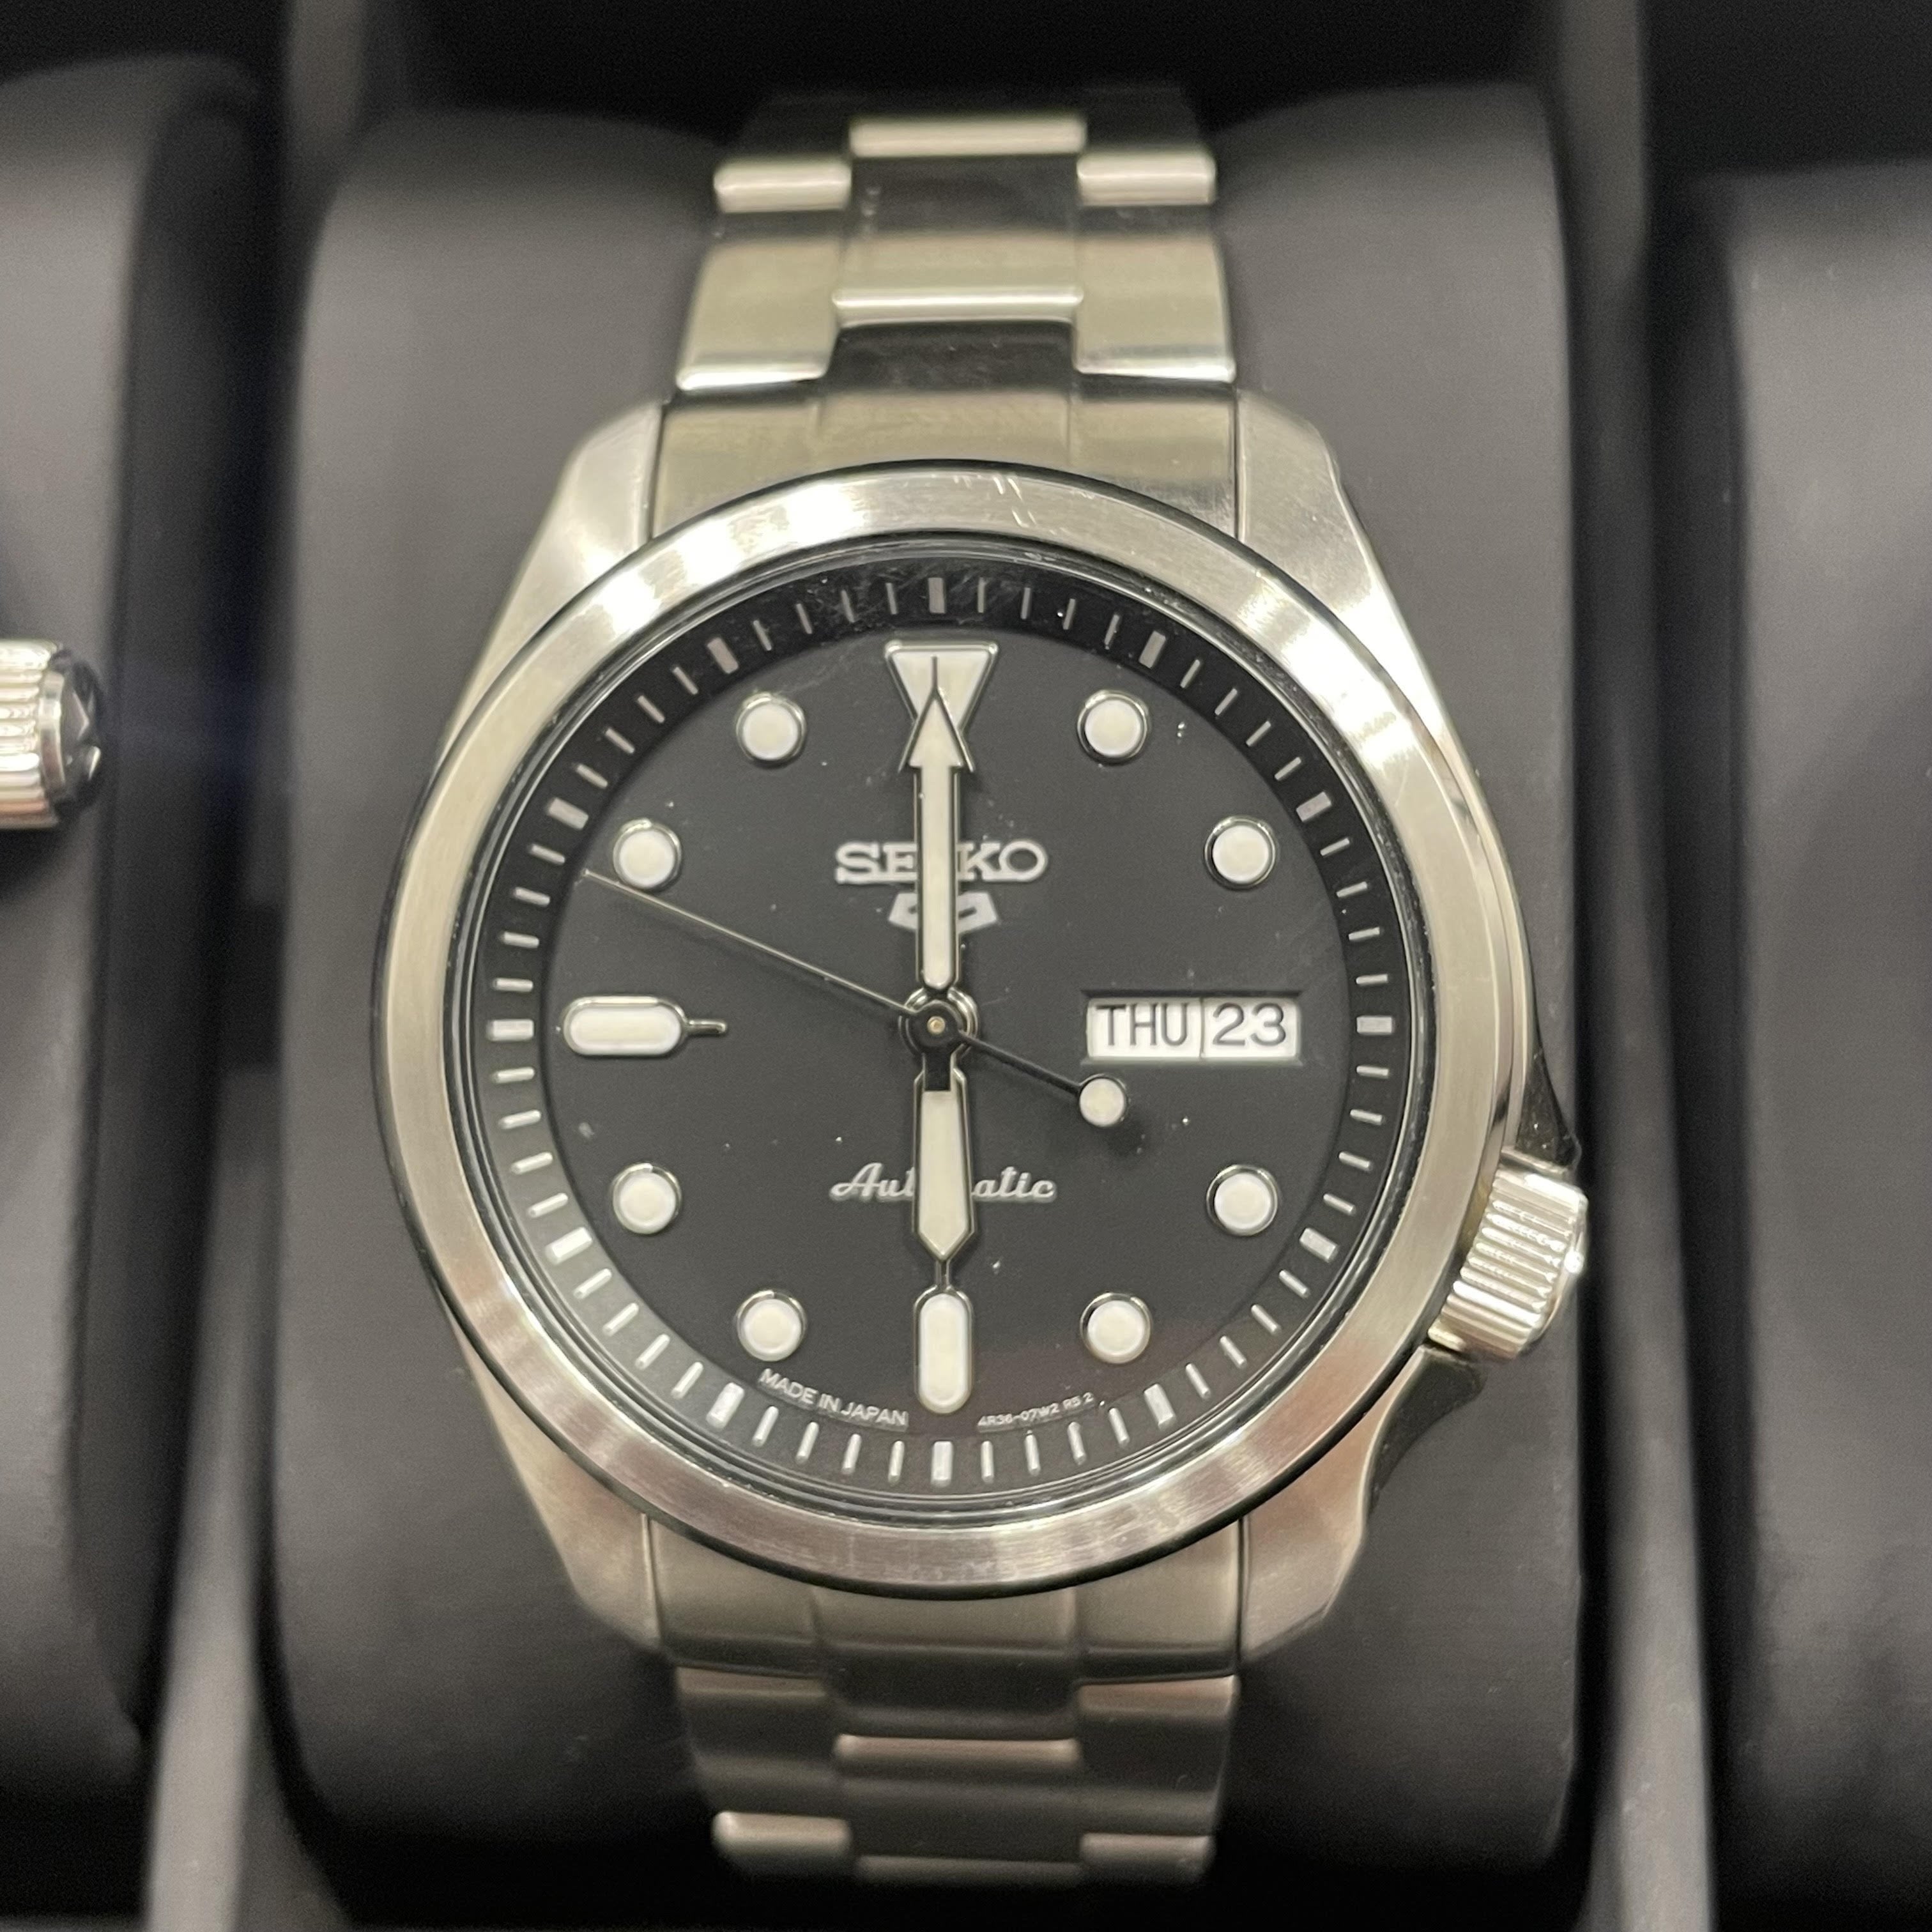 Seiko SRPE67 Domed Sapphire Crystal Replacement Worth it? | The Watch Site